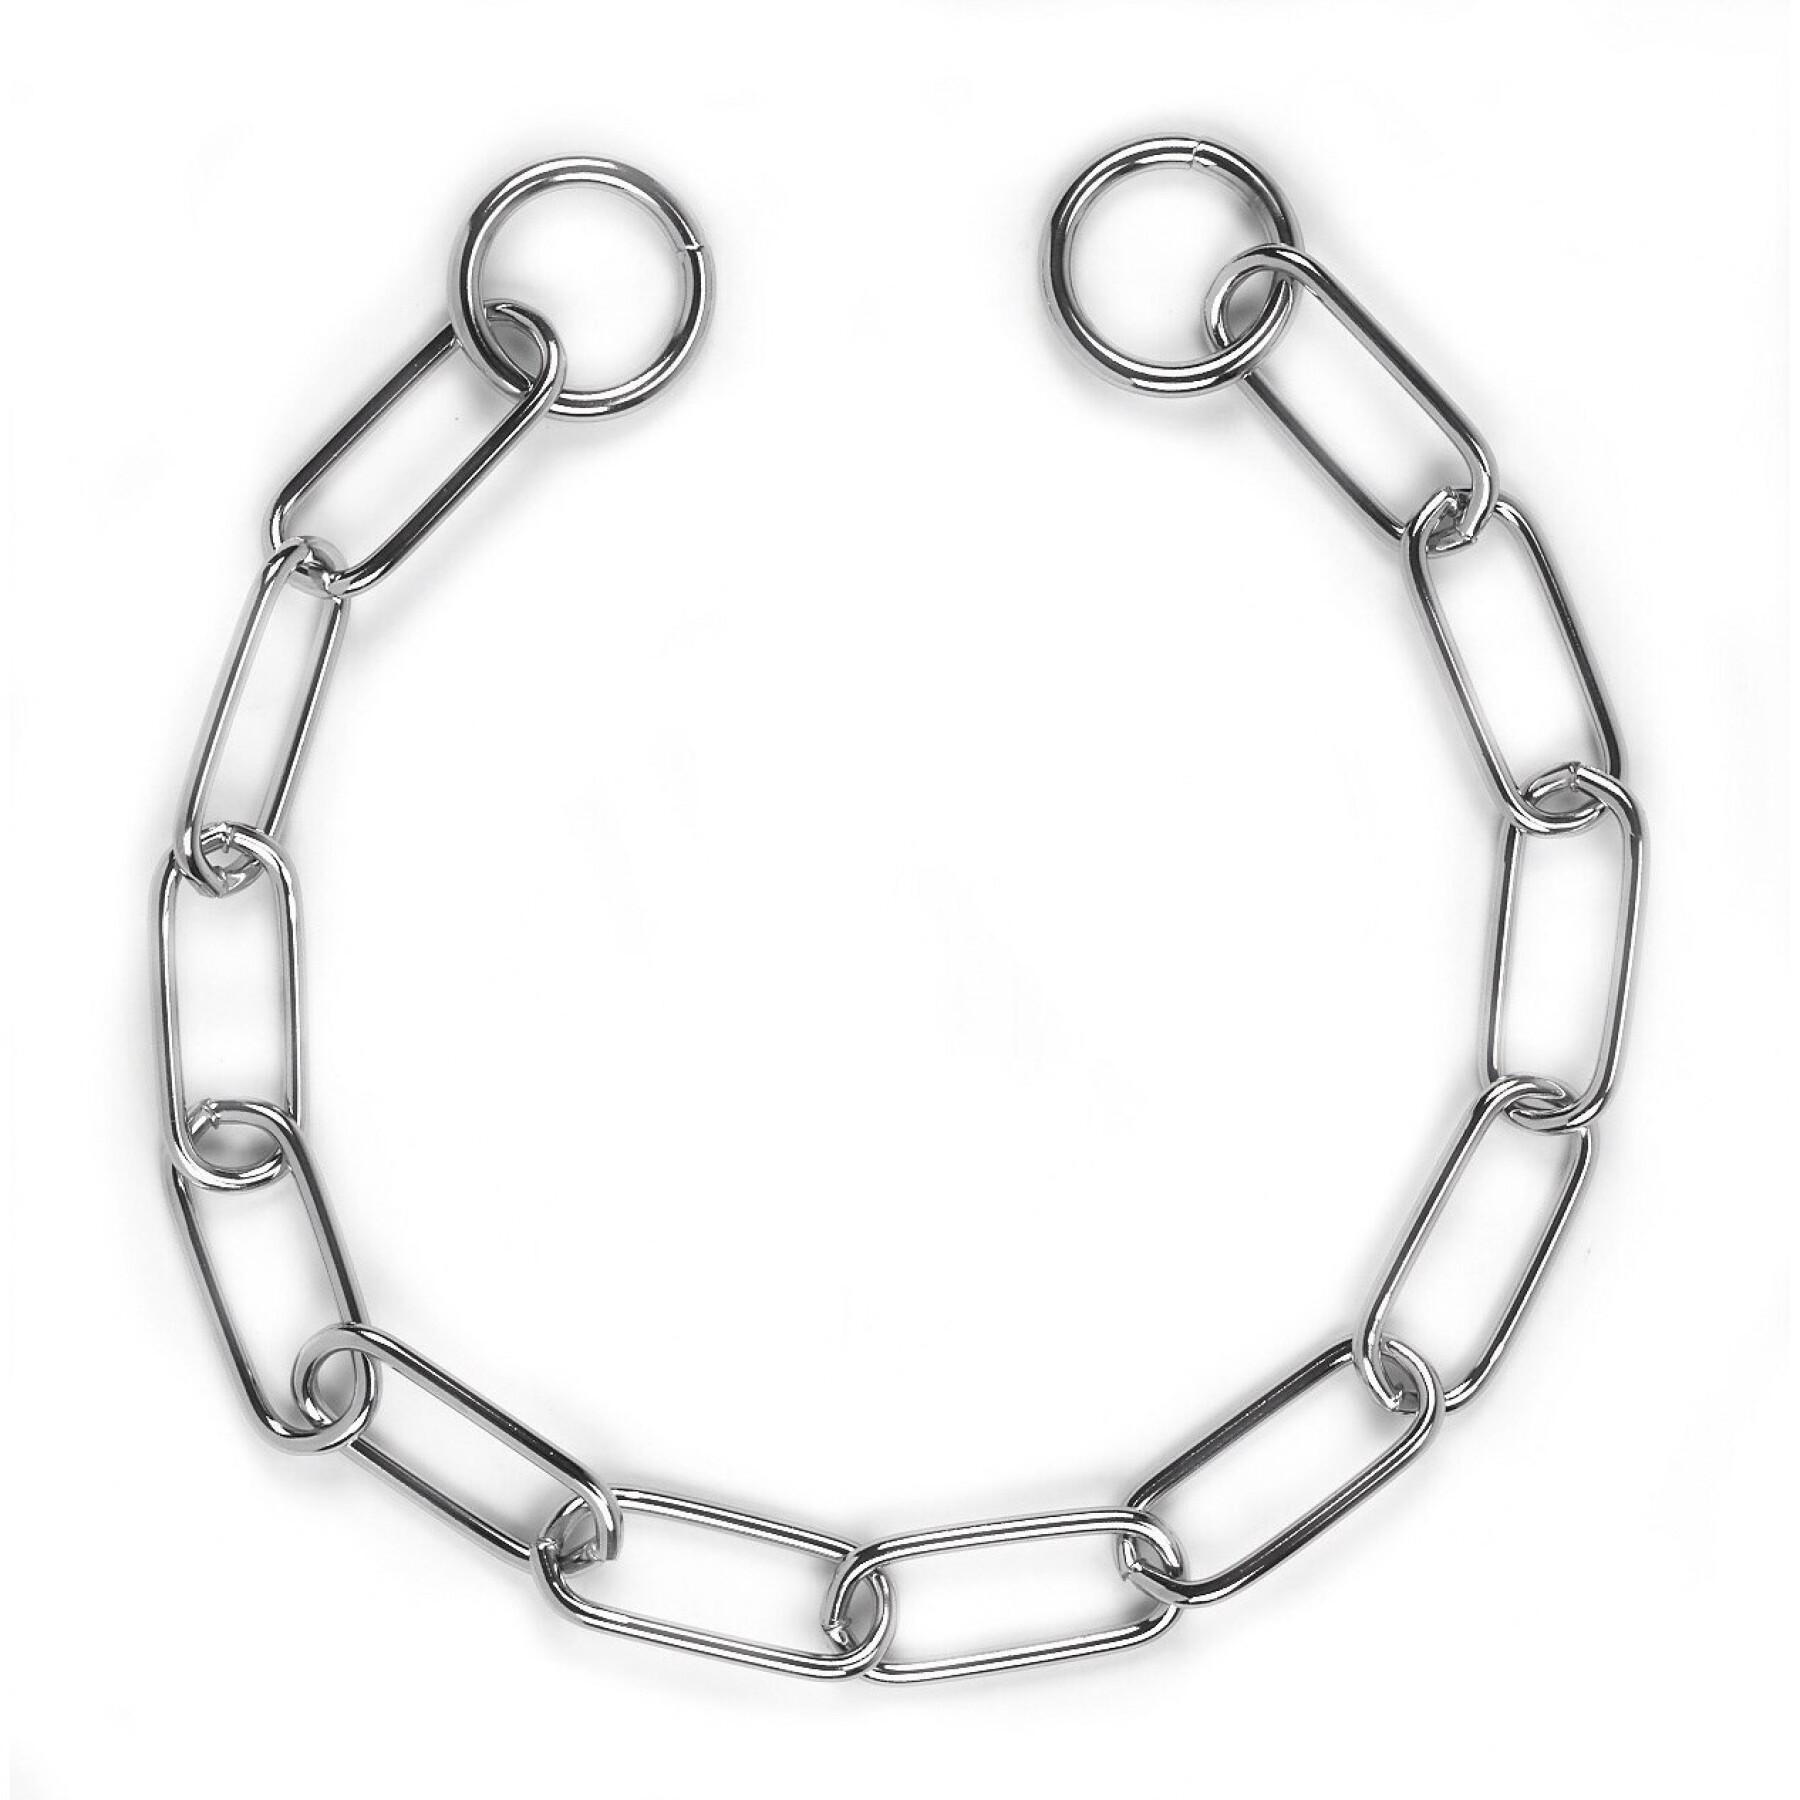 Chromium plated chain collar for dogs Kerbl